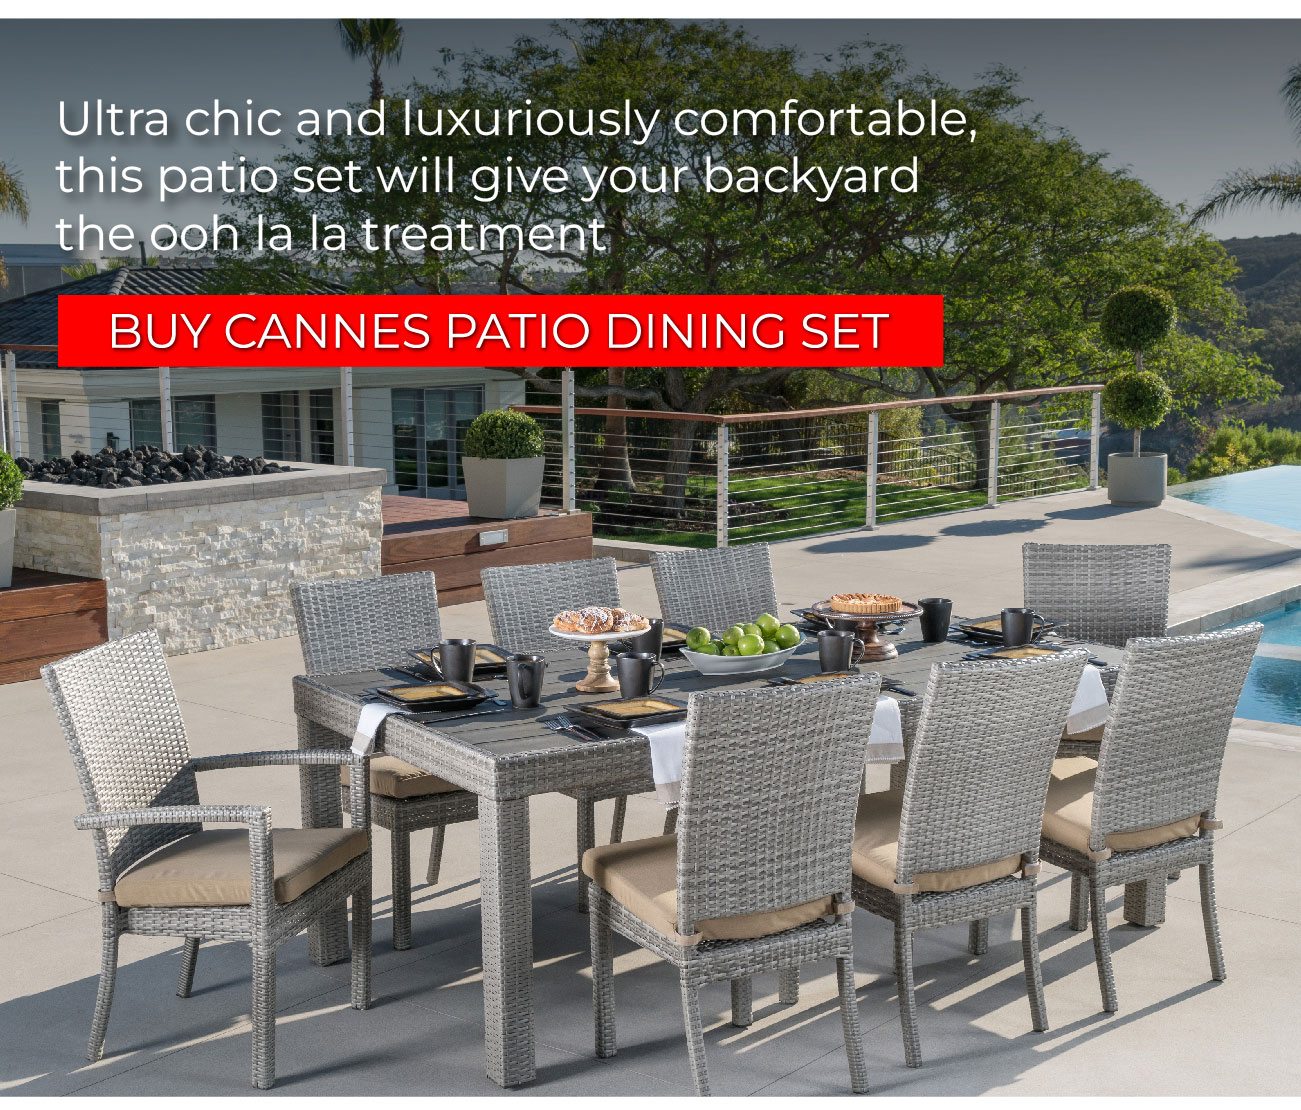 Cannes Patio Dining Set